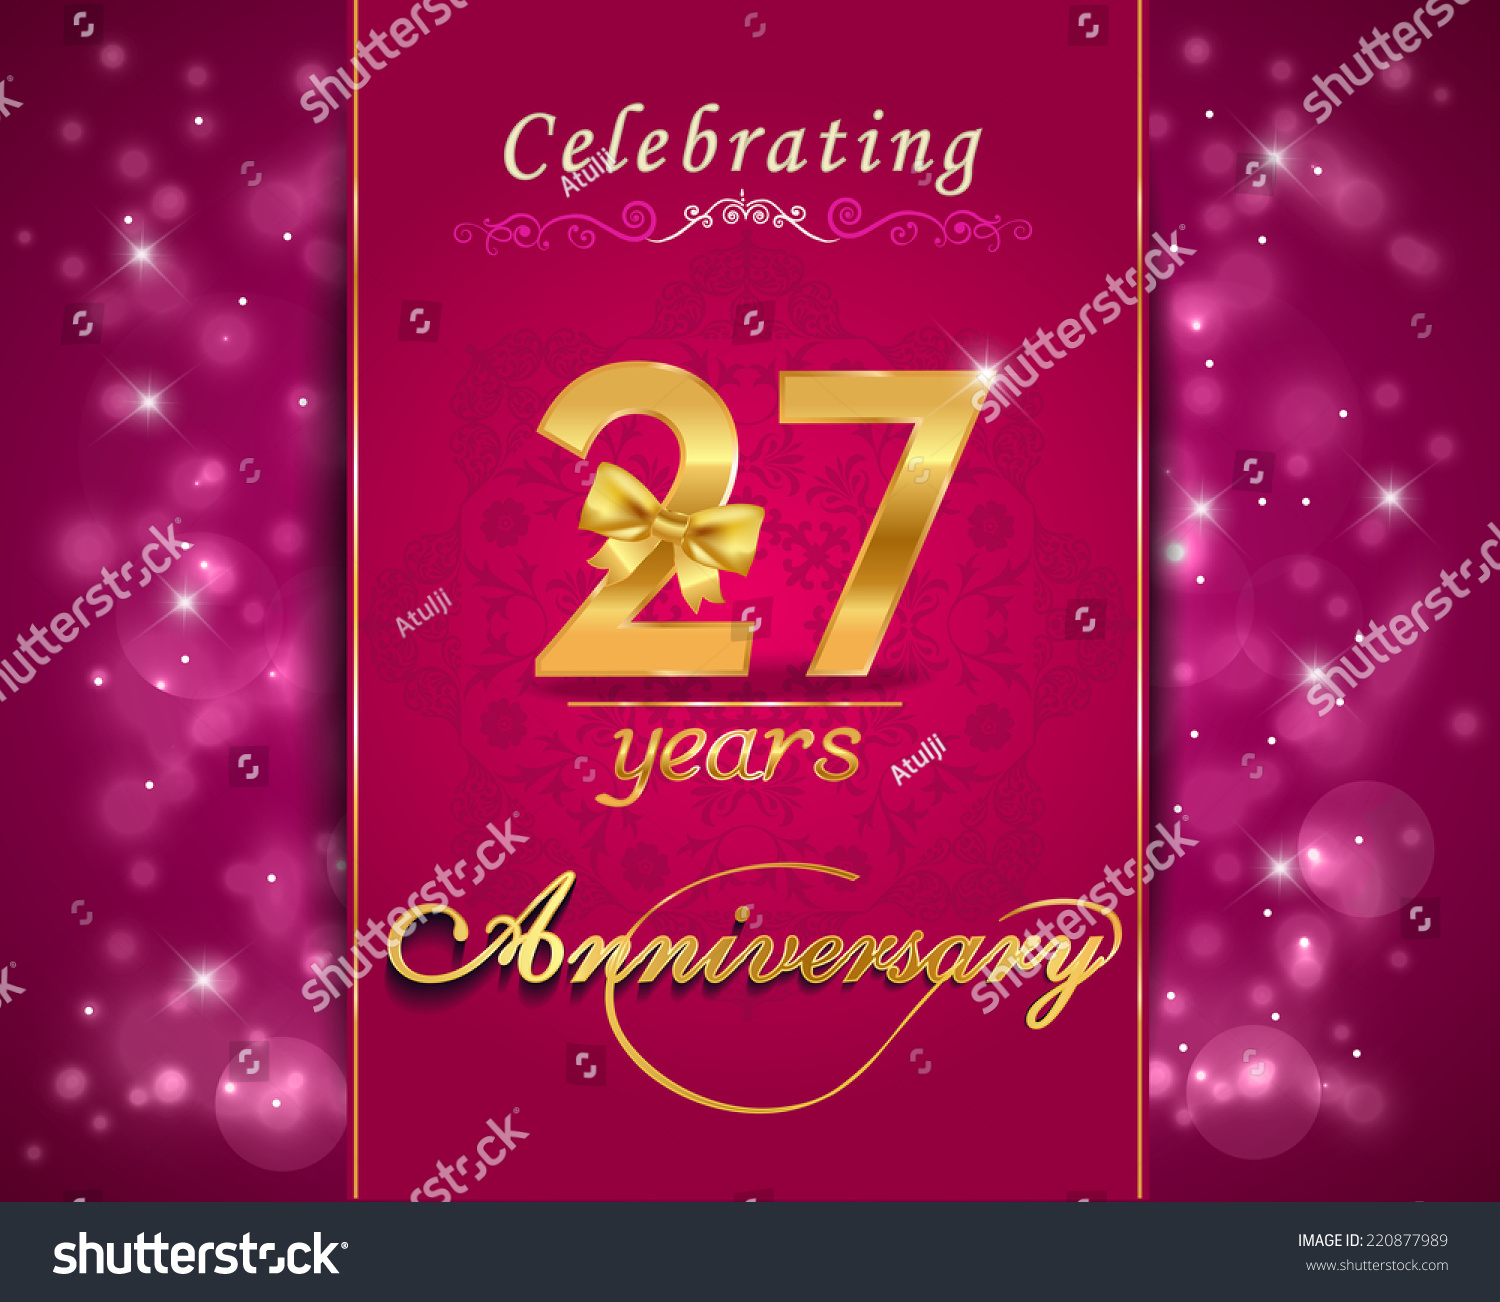 27-year-anniversary-celebration-sparkling-card-stock-vector-220877989